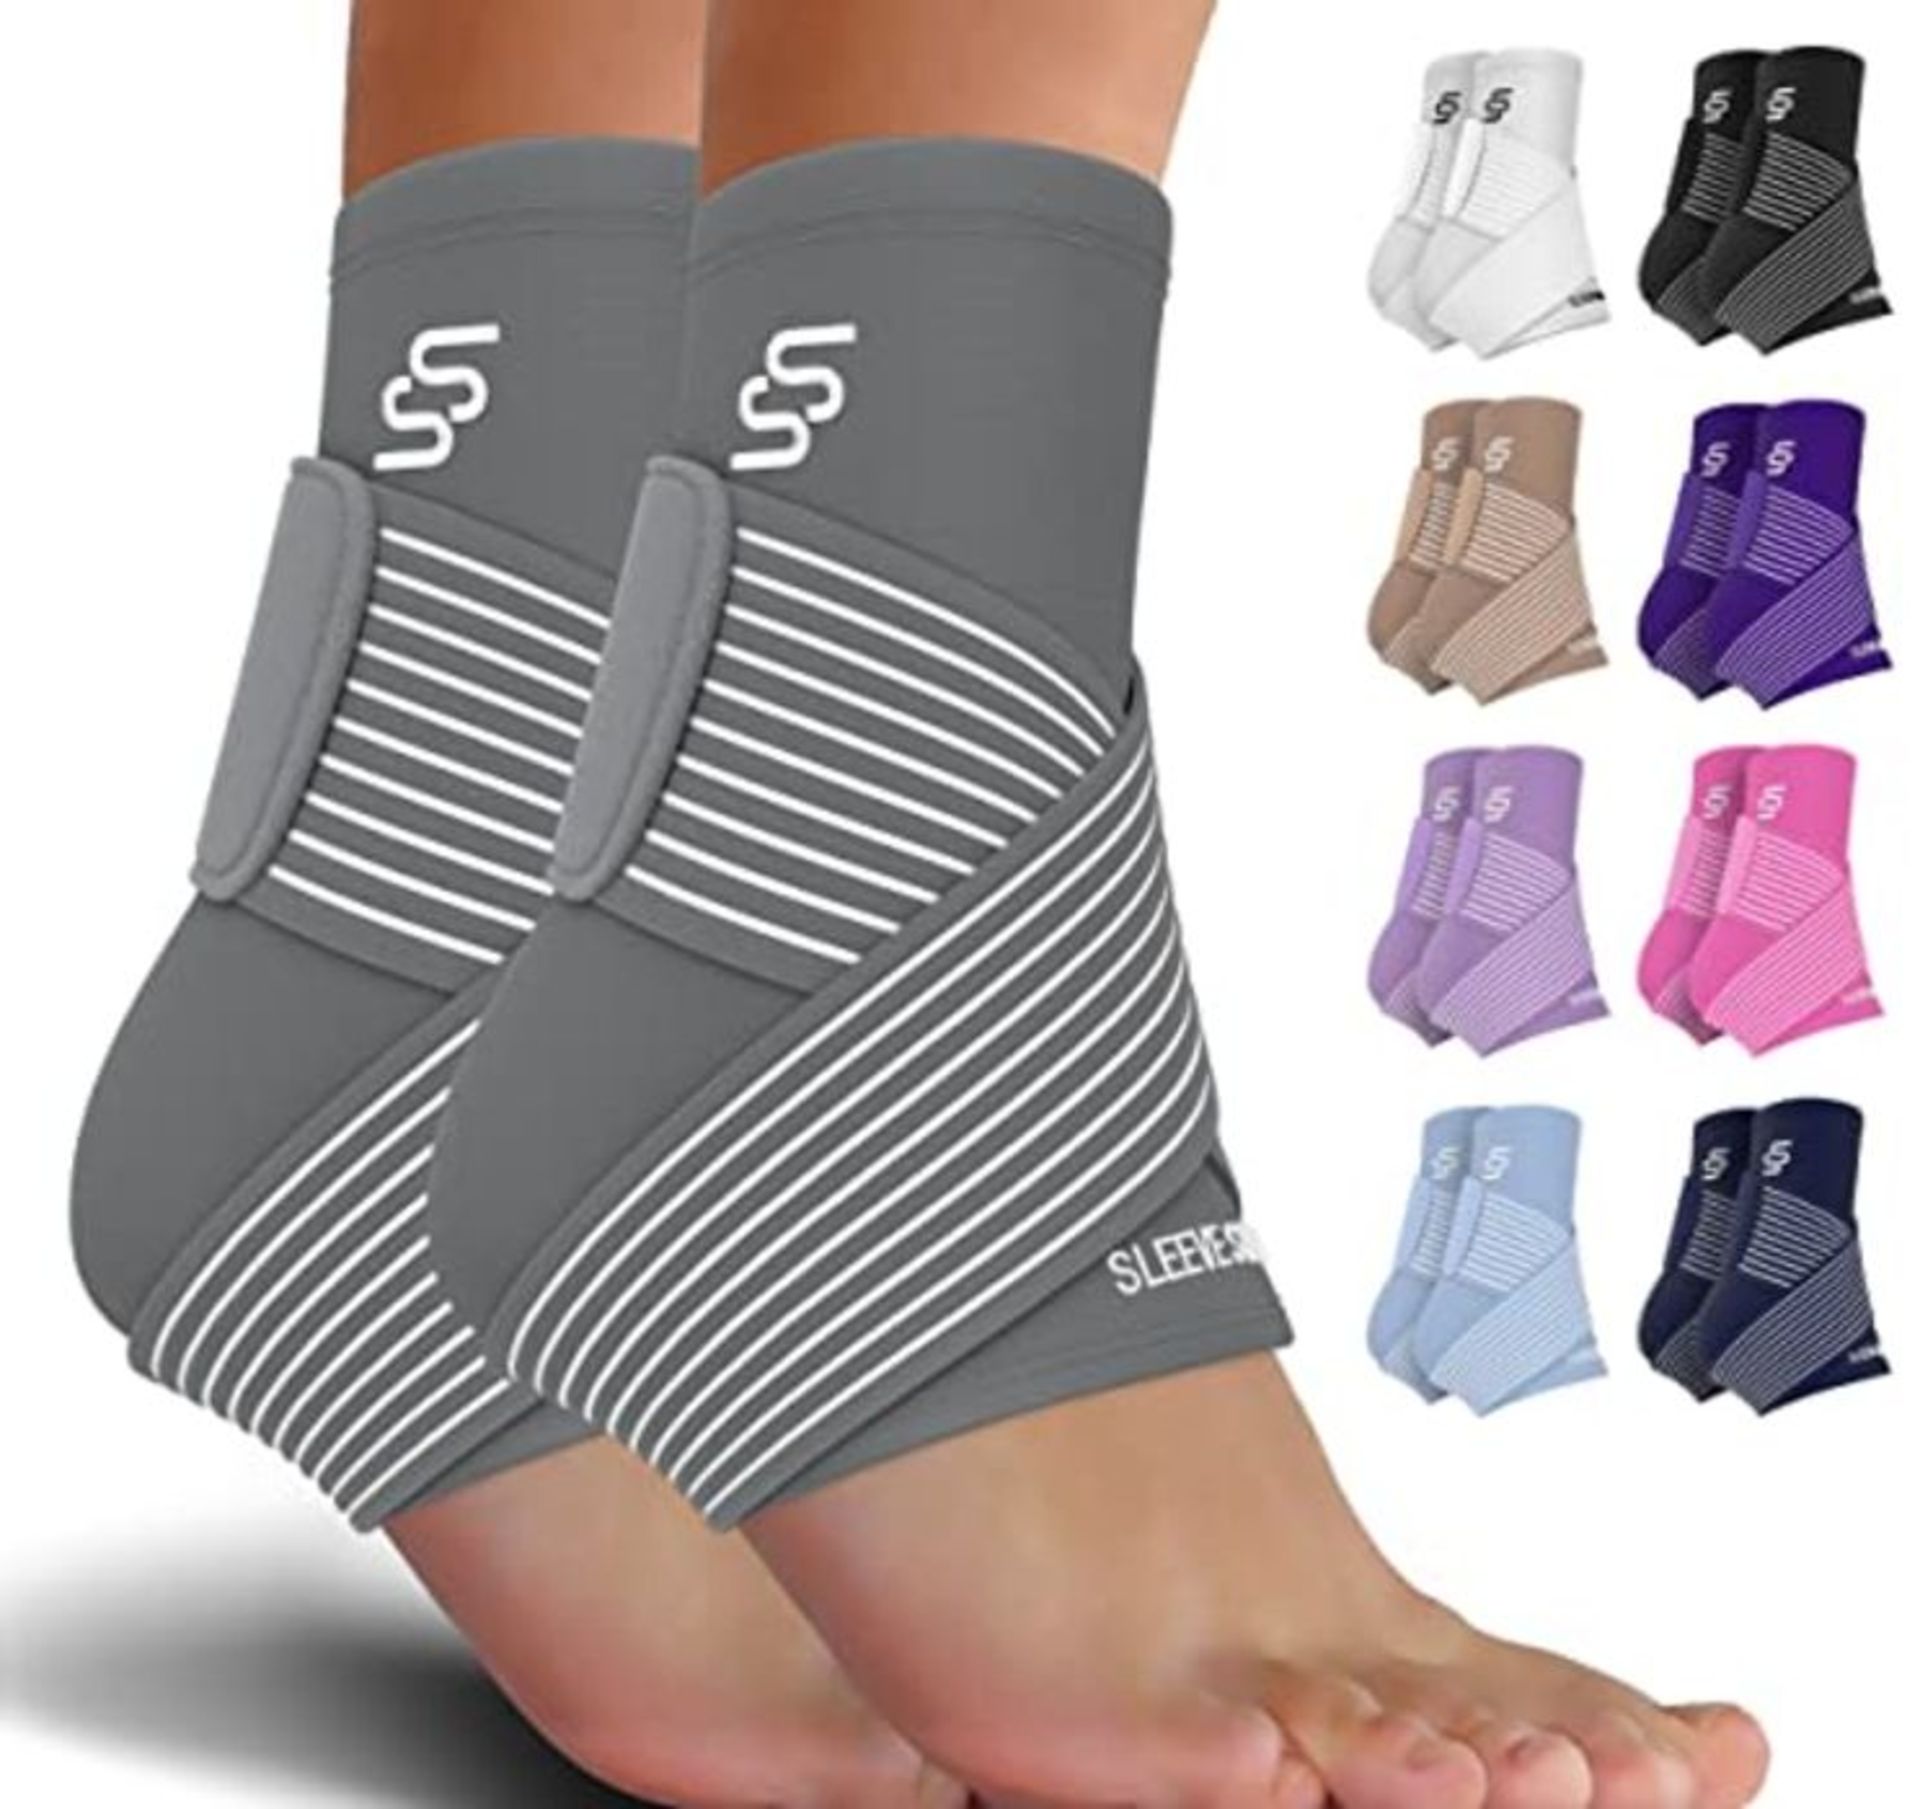 Sleeve Stars Ankle Support for Women and Men, Ankle Brace Achilles Tendonitis Foot & P - Image 4 of 6